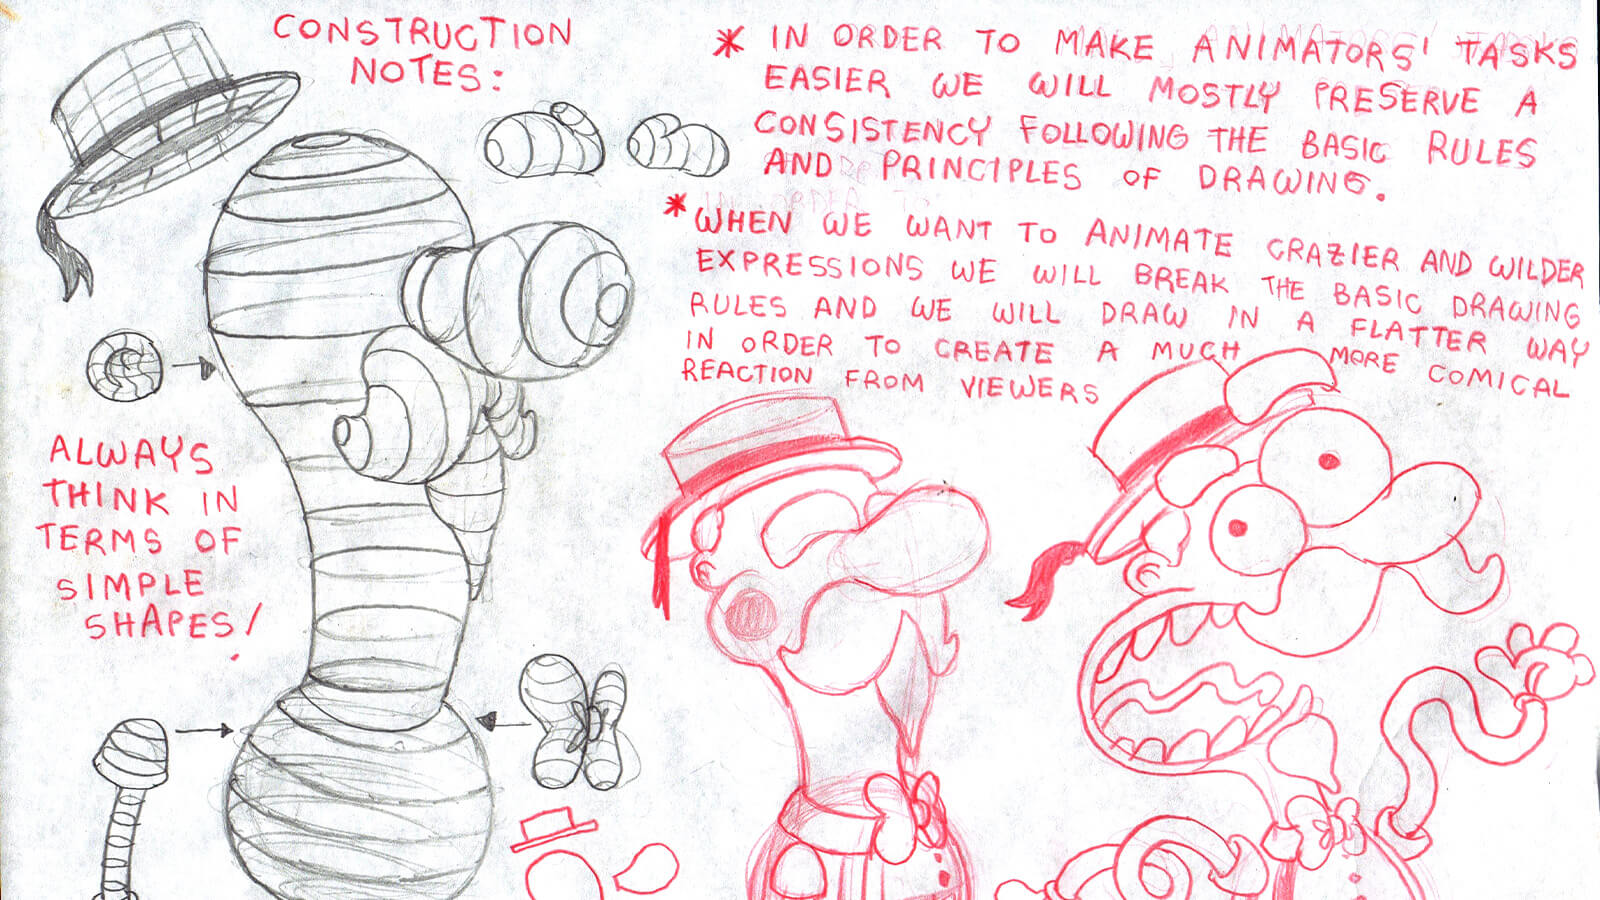 Drawing concepts of the old carnival balloonman with written notes